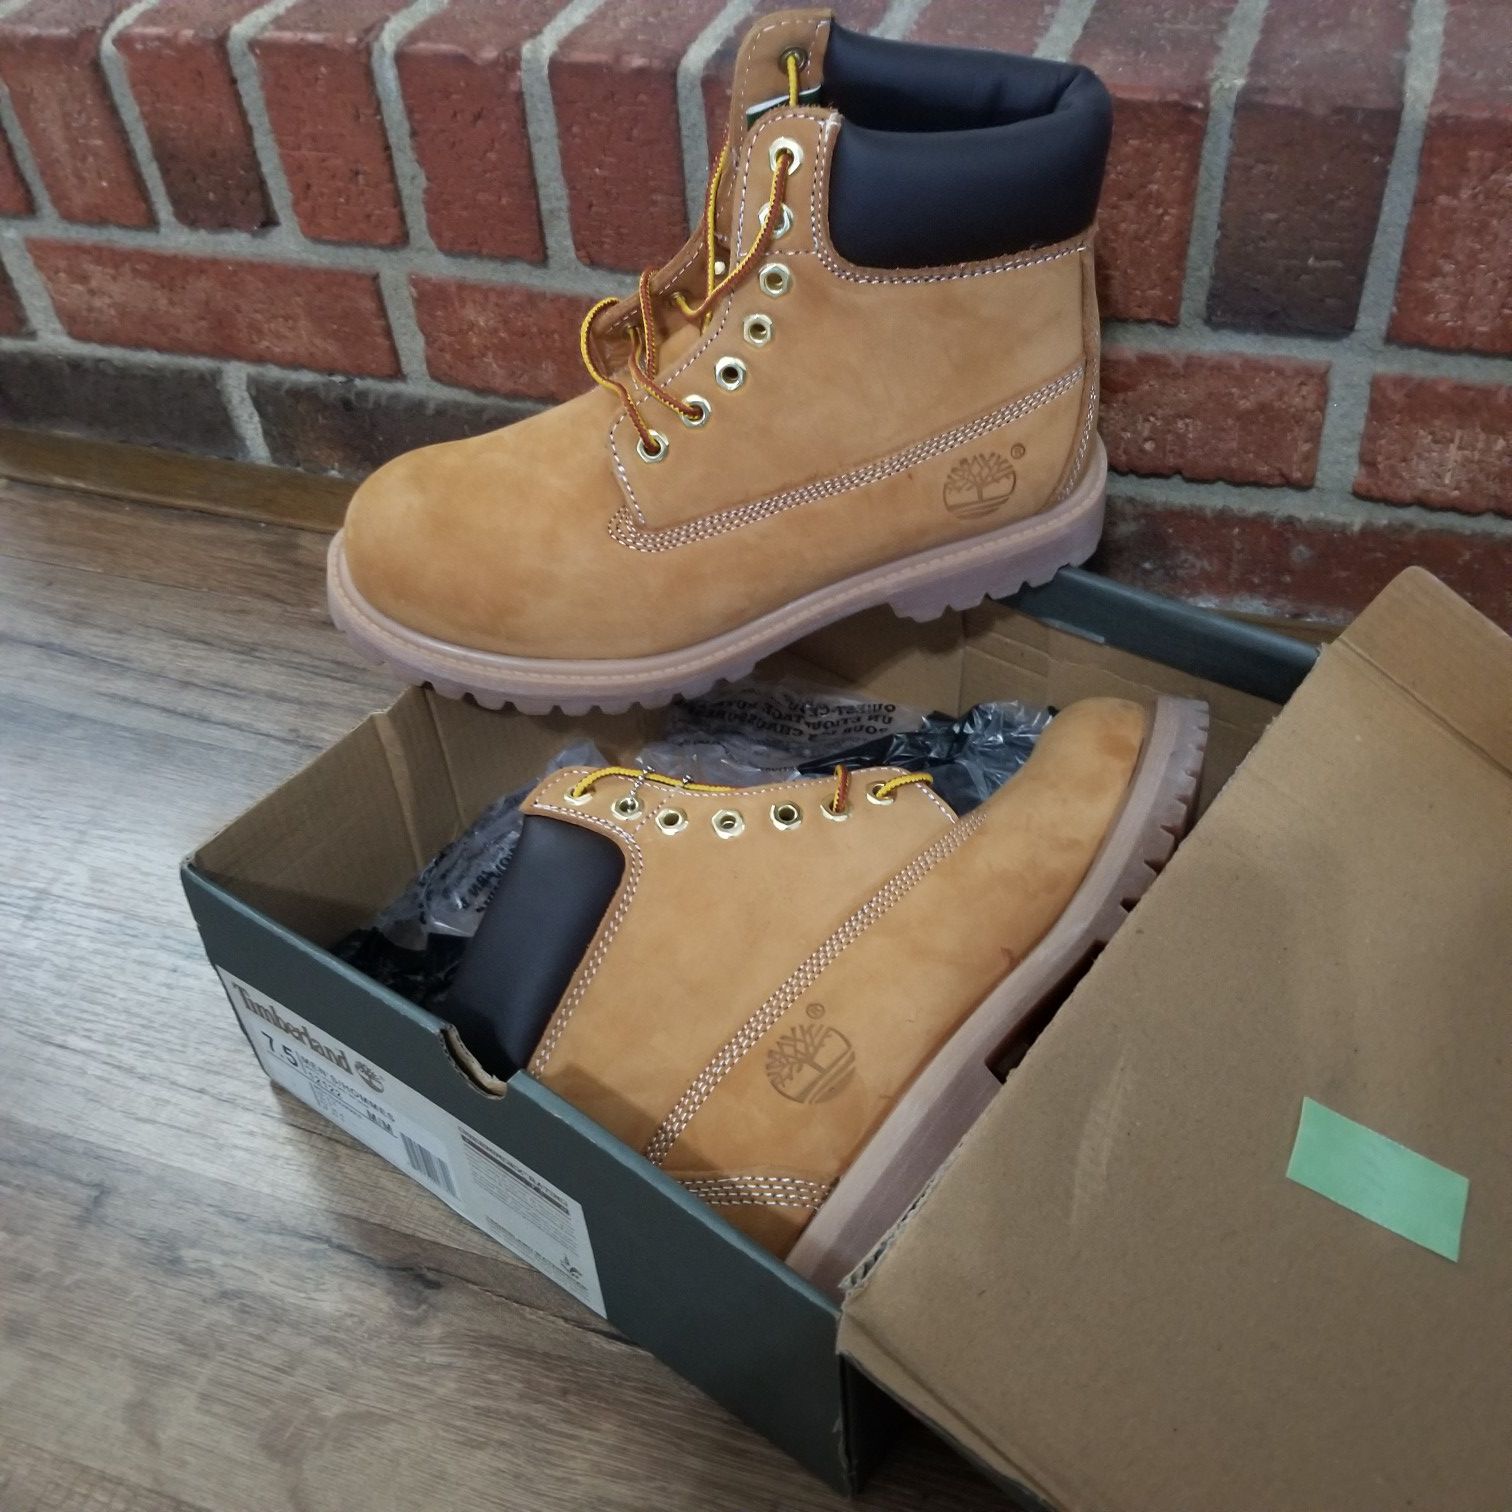 New MenTimberland boots